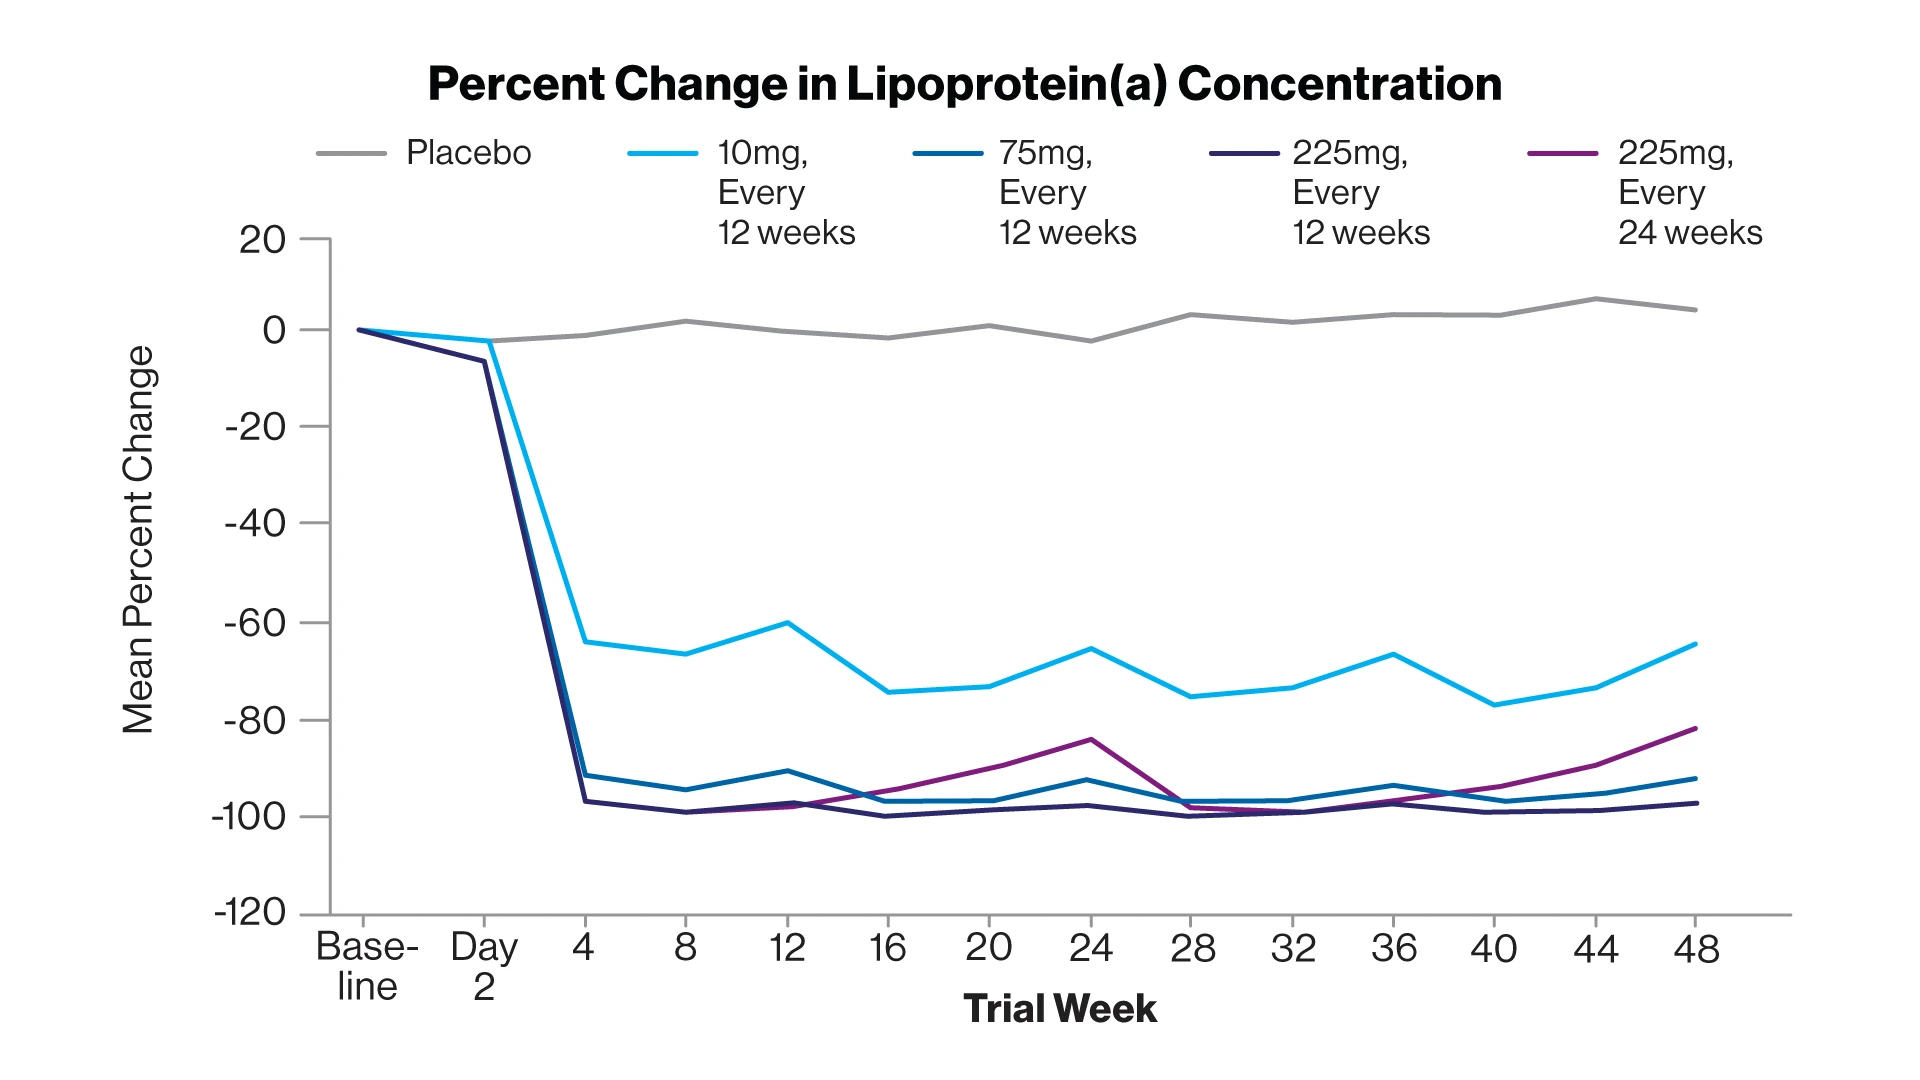 The mean percent change in the lipoprotein(a) concentration over time according to trial group.  

